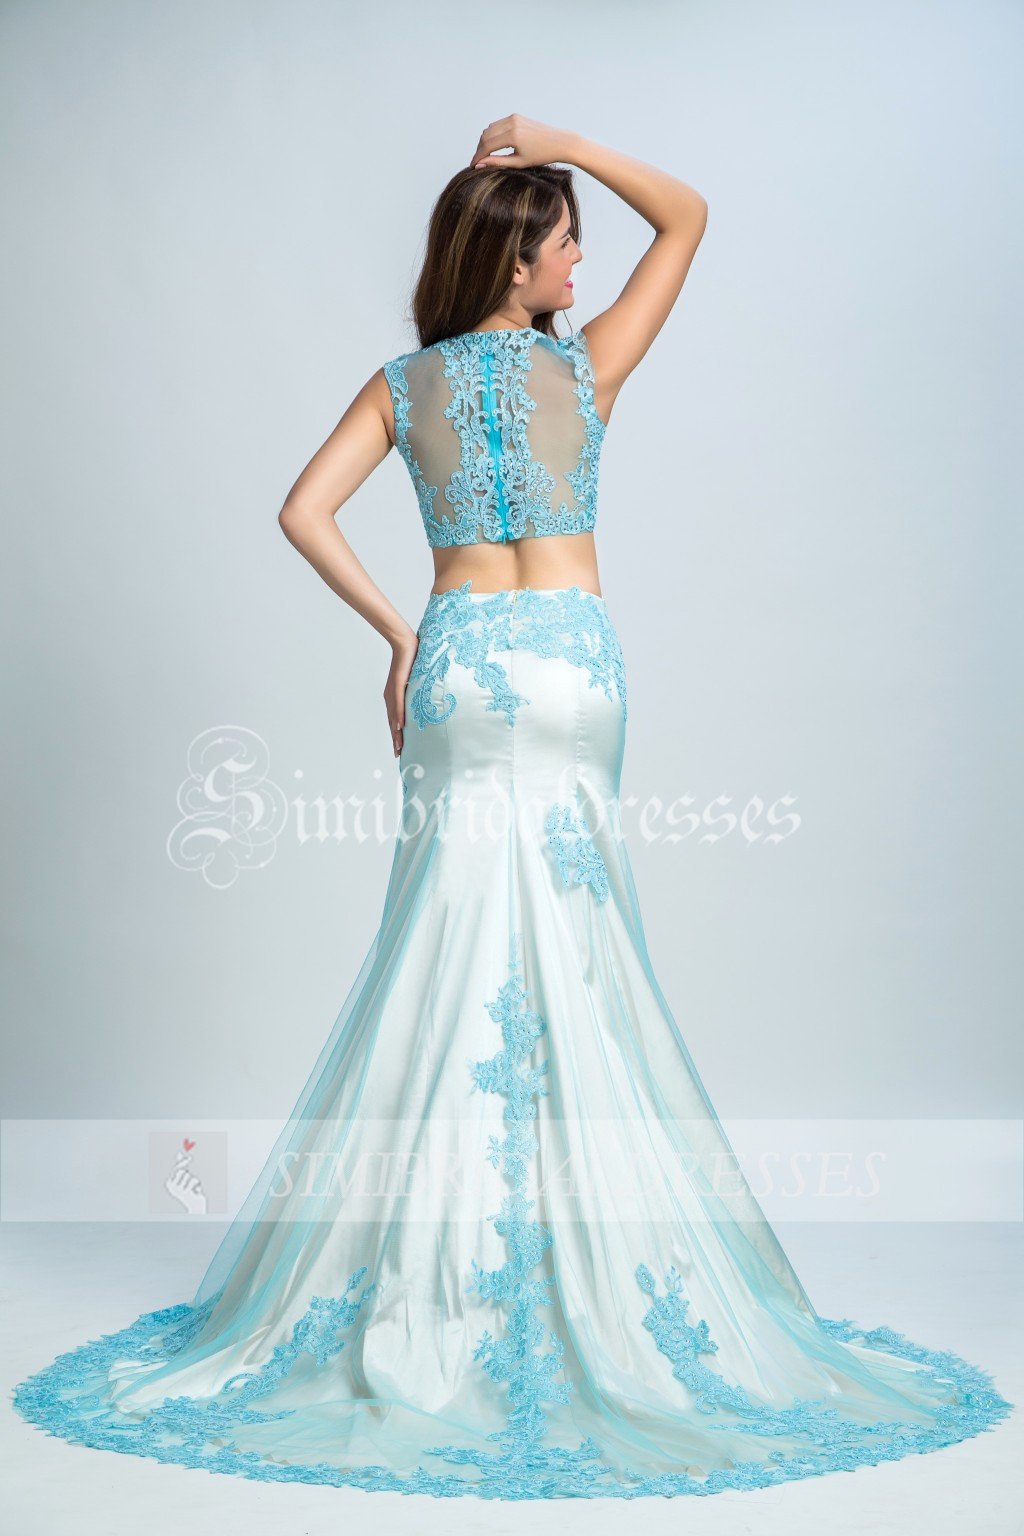 Two-piece Mermaid Prom Gown,New Arrival Light Blue Formal Dress,Sleeveless Tulle Prom Dress,N142